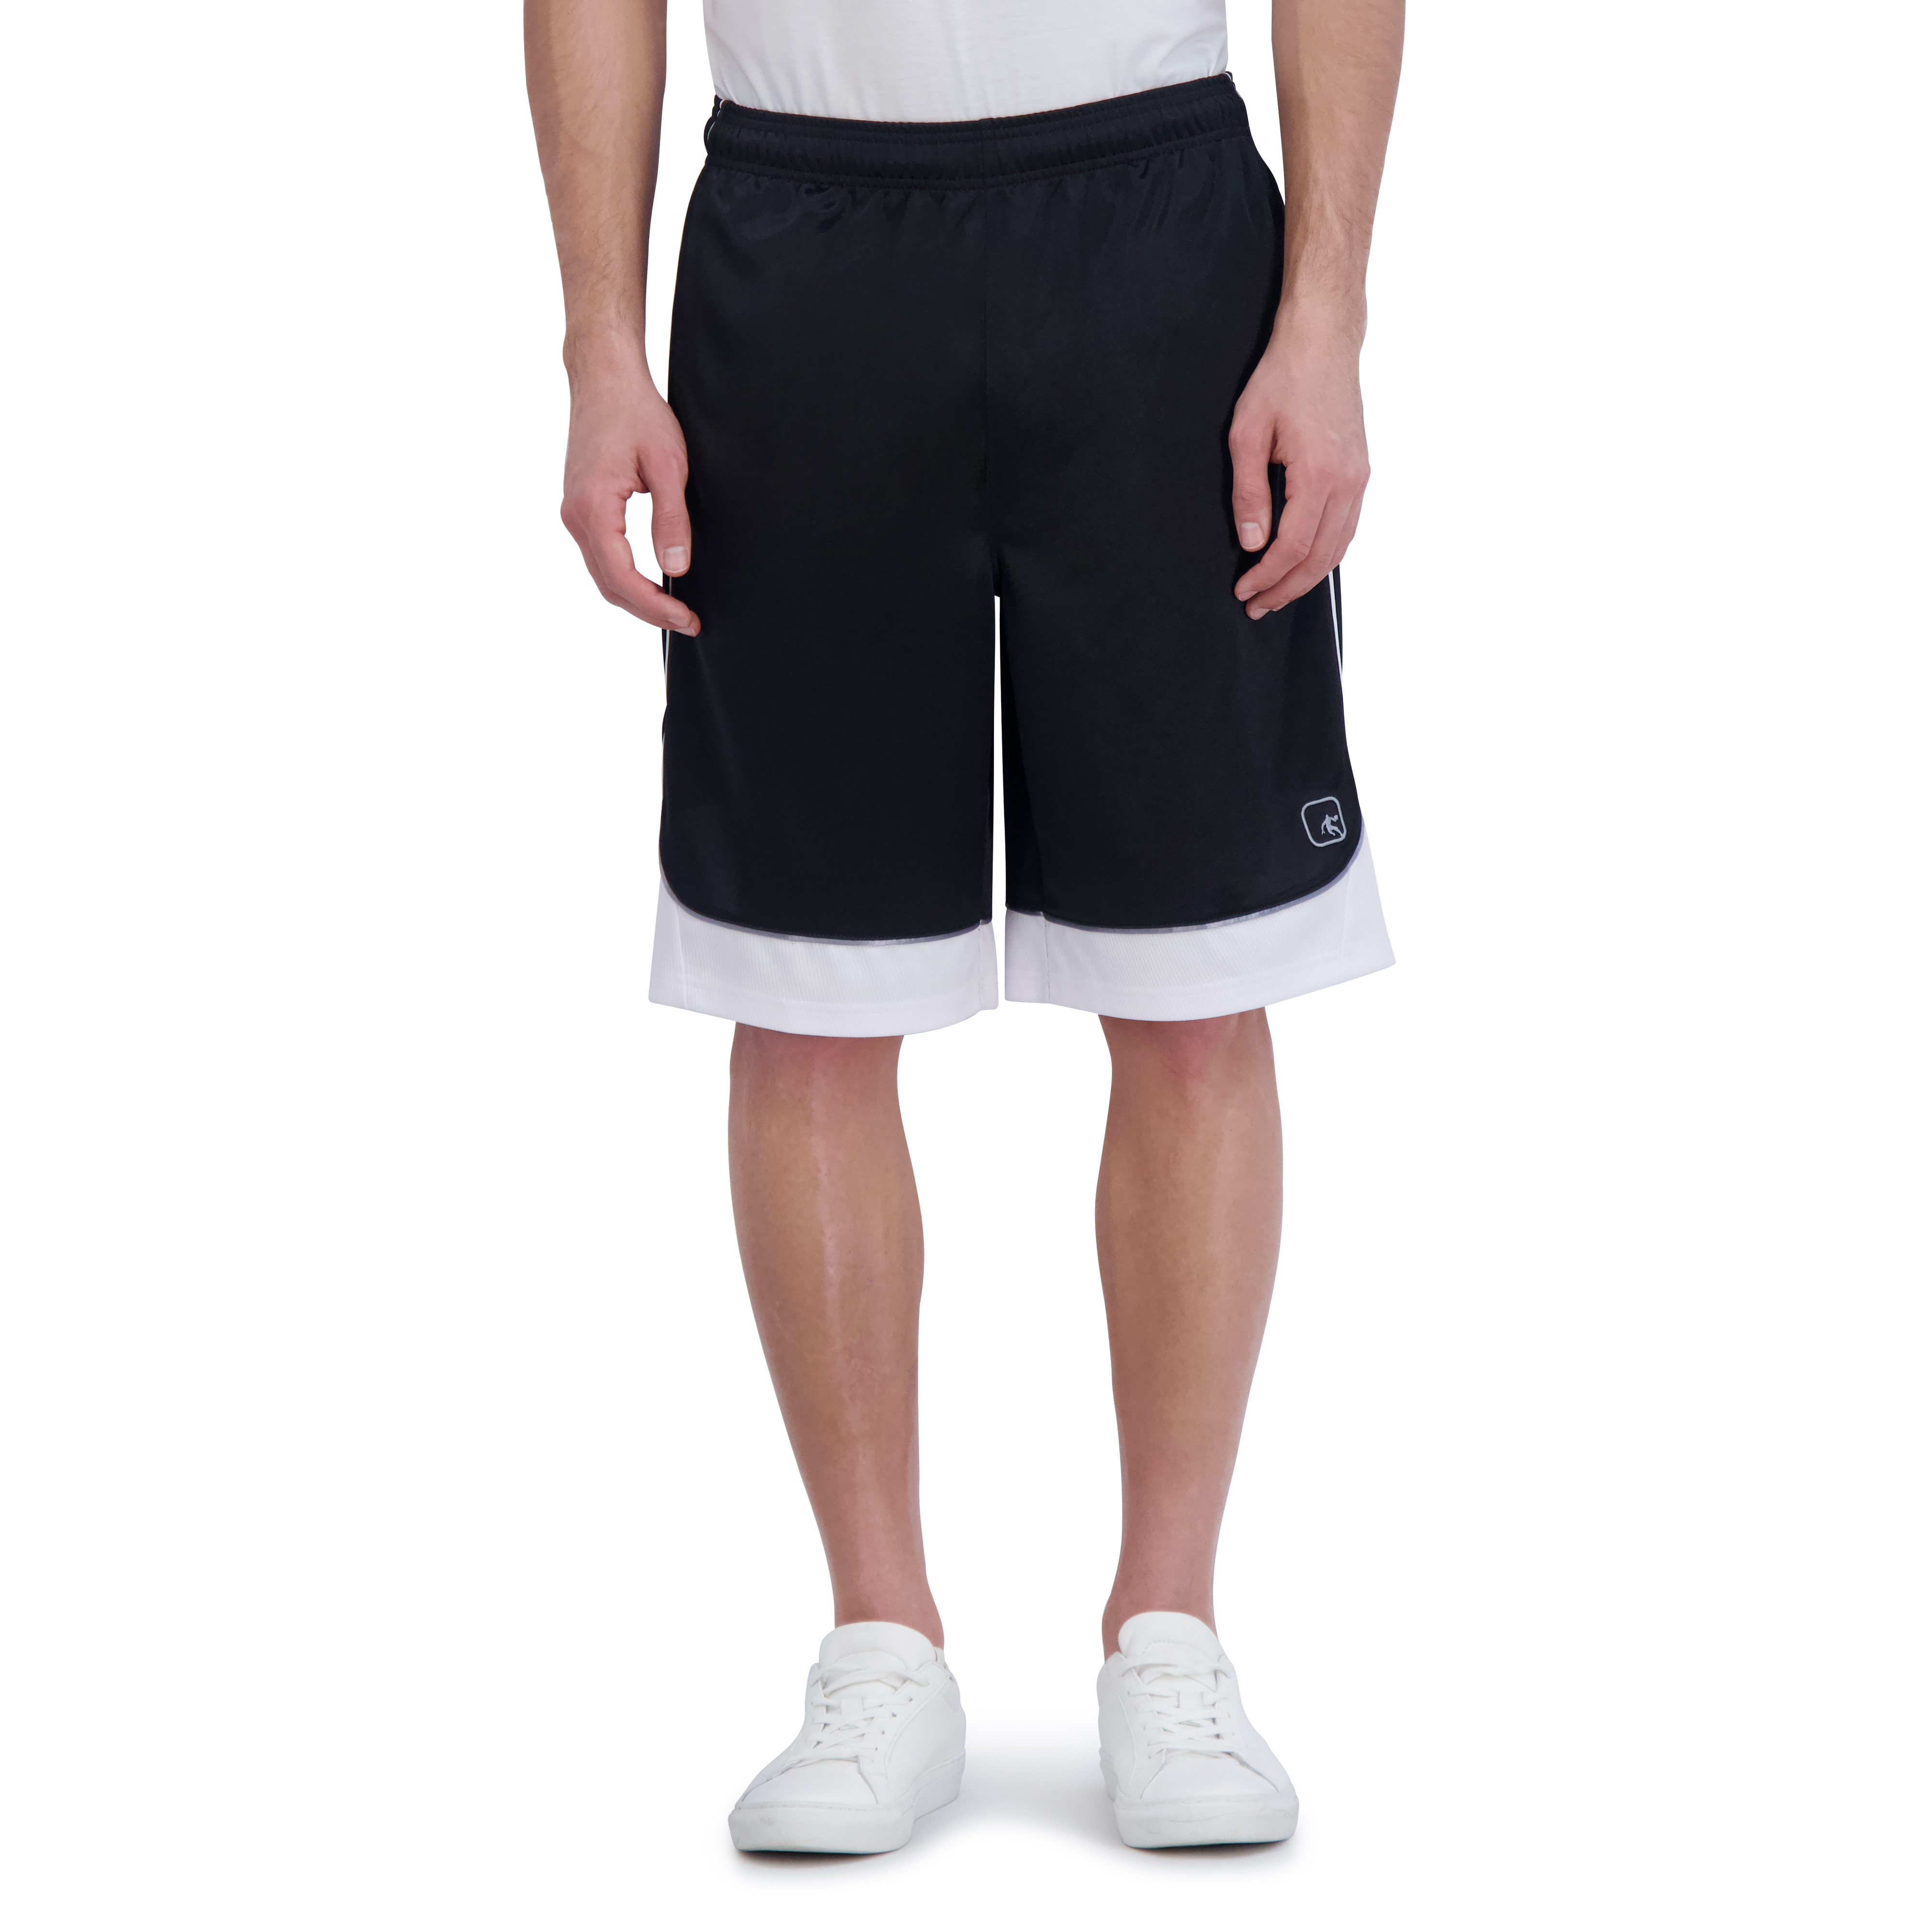 AND1 Men and Big Men's All Court Colorblock 11" Shorts, up to Size 3XL - image 1 of 6